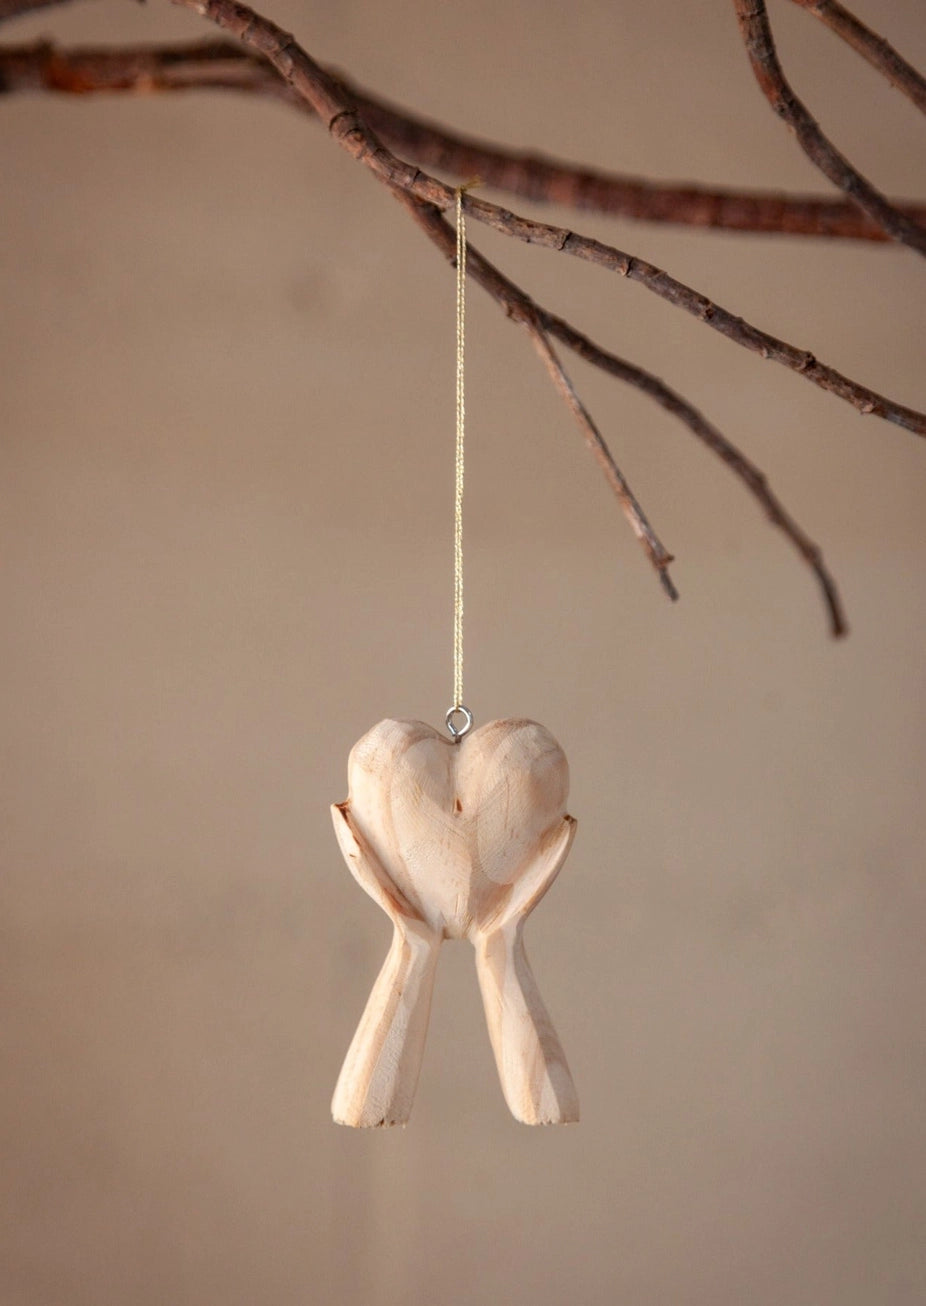 Hands Holding Heart Ornaments